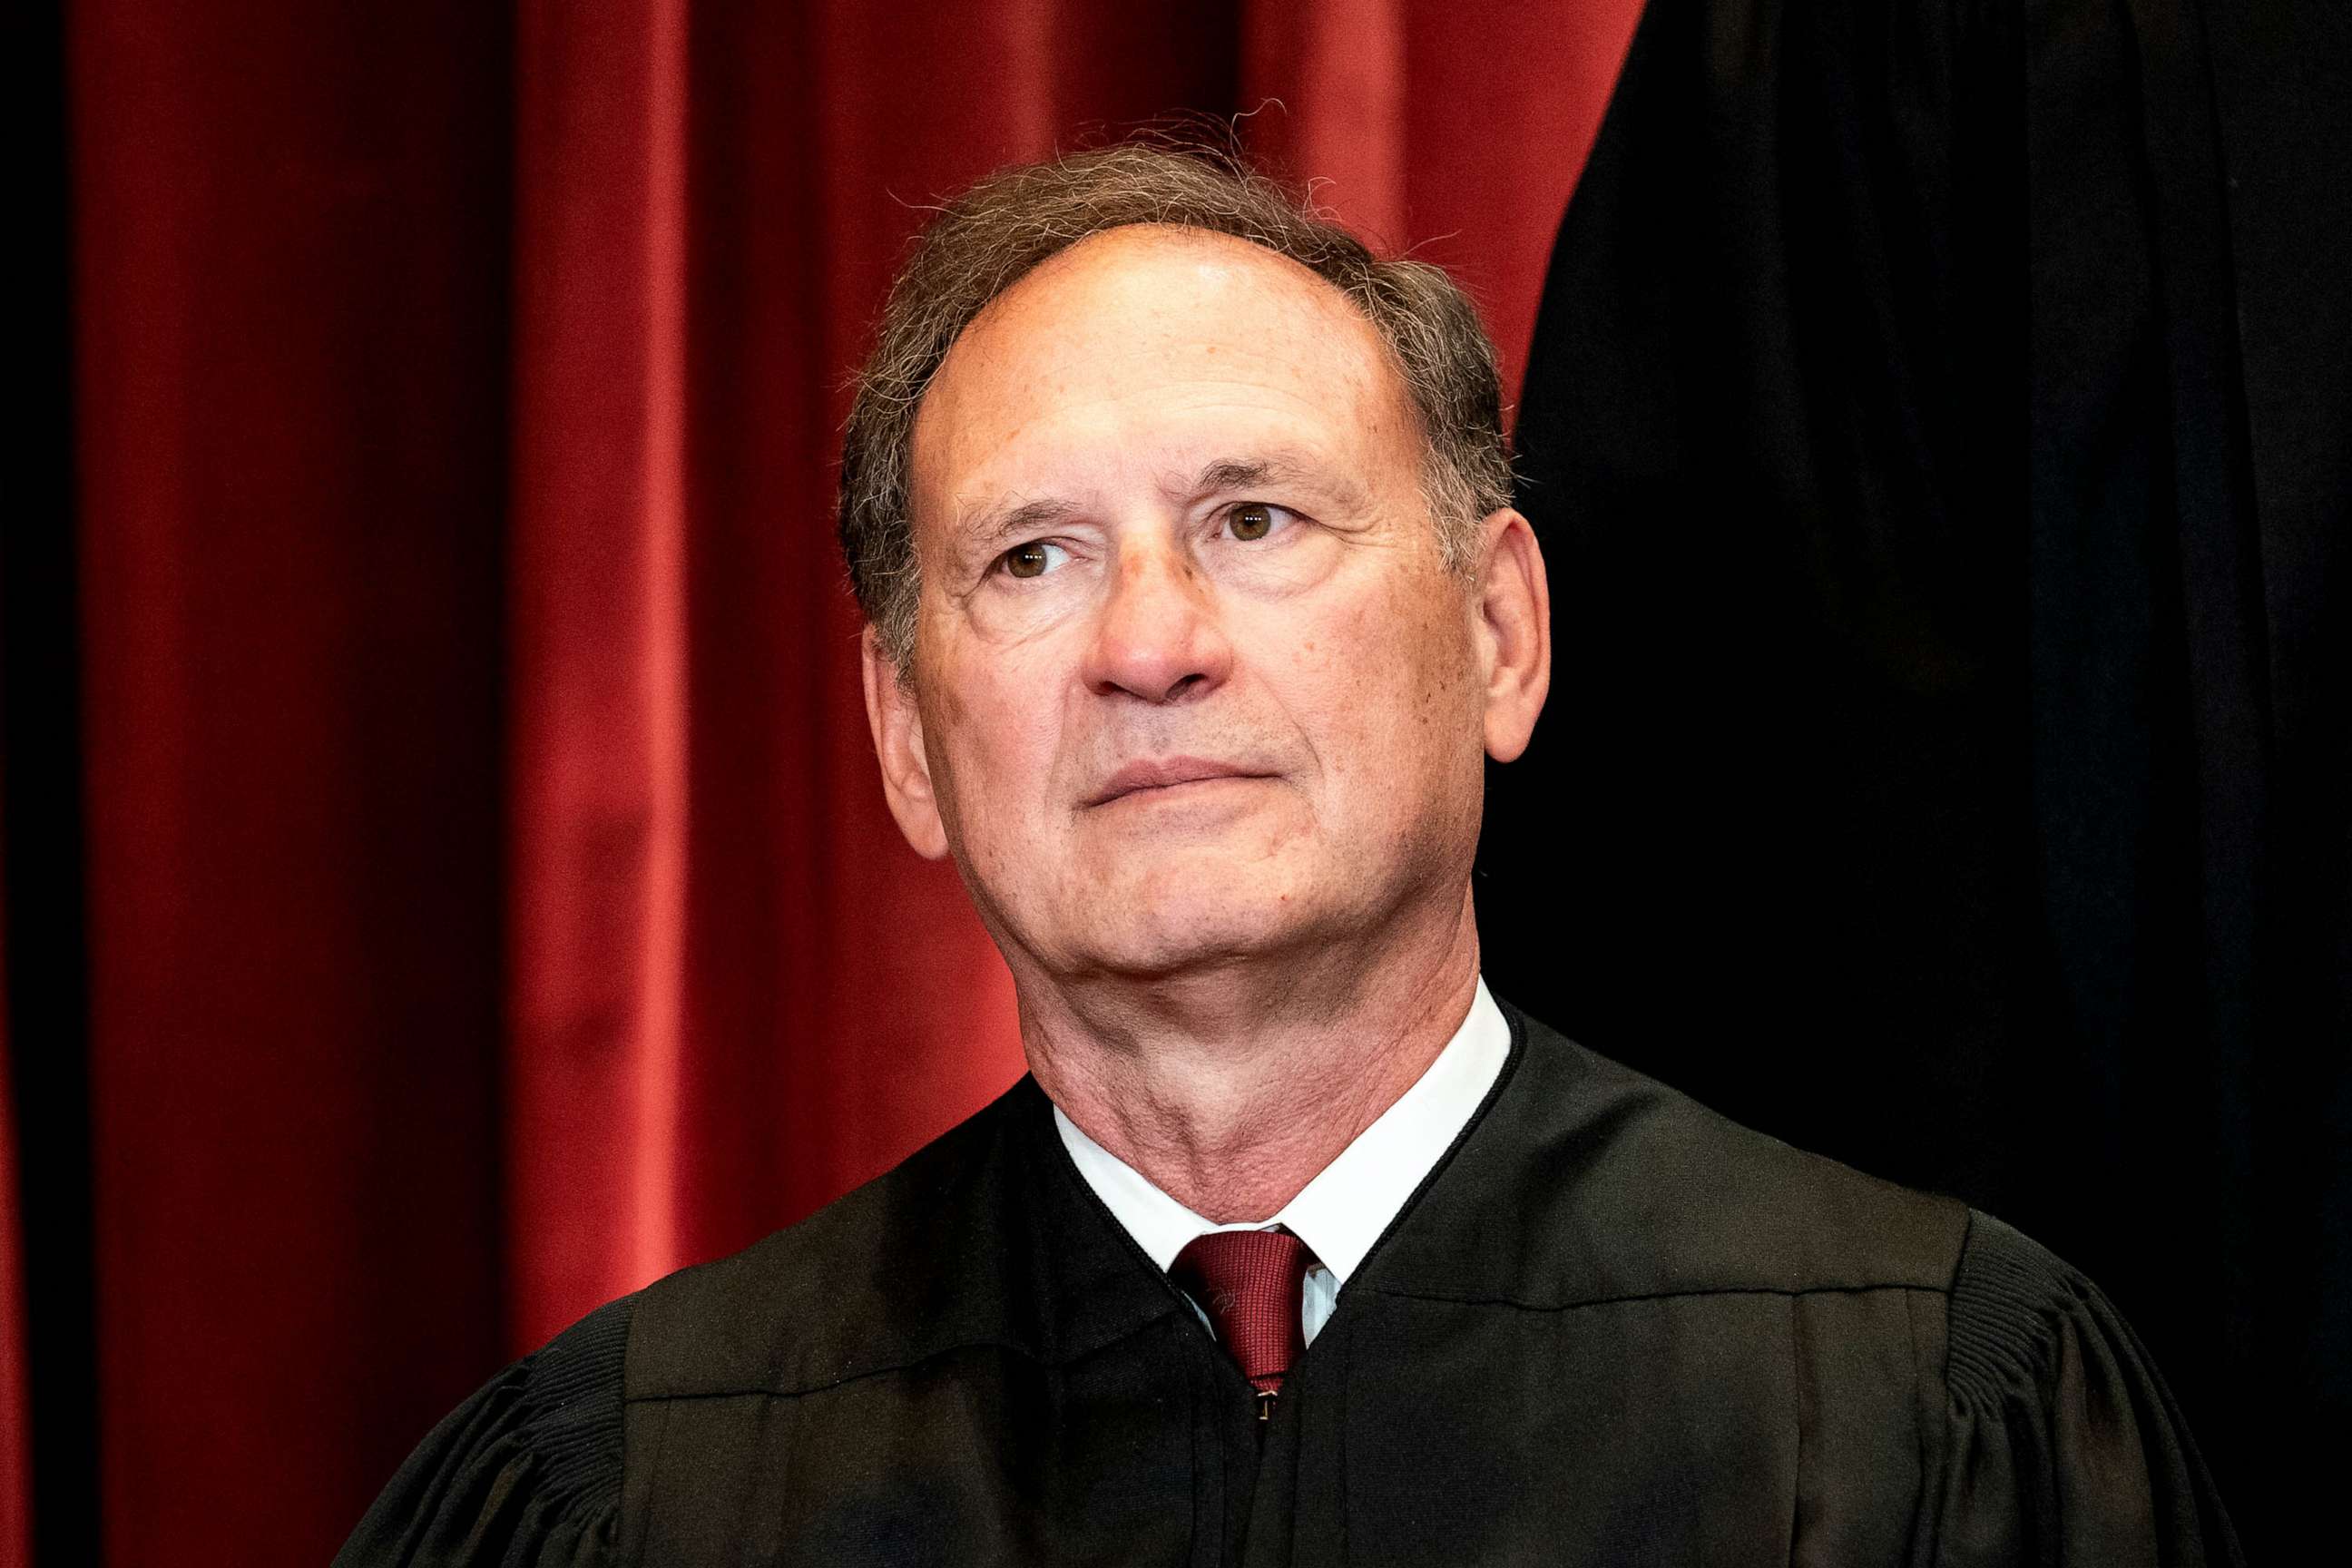 PHOTO: FILE - Justice Samuel Alito sits during a group photo of the Justices at the Supreme Court in Washington, DC, April 23, 2021.